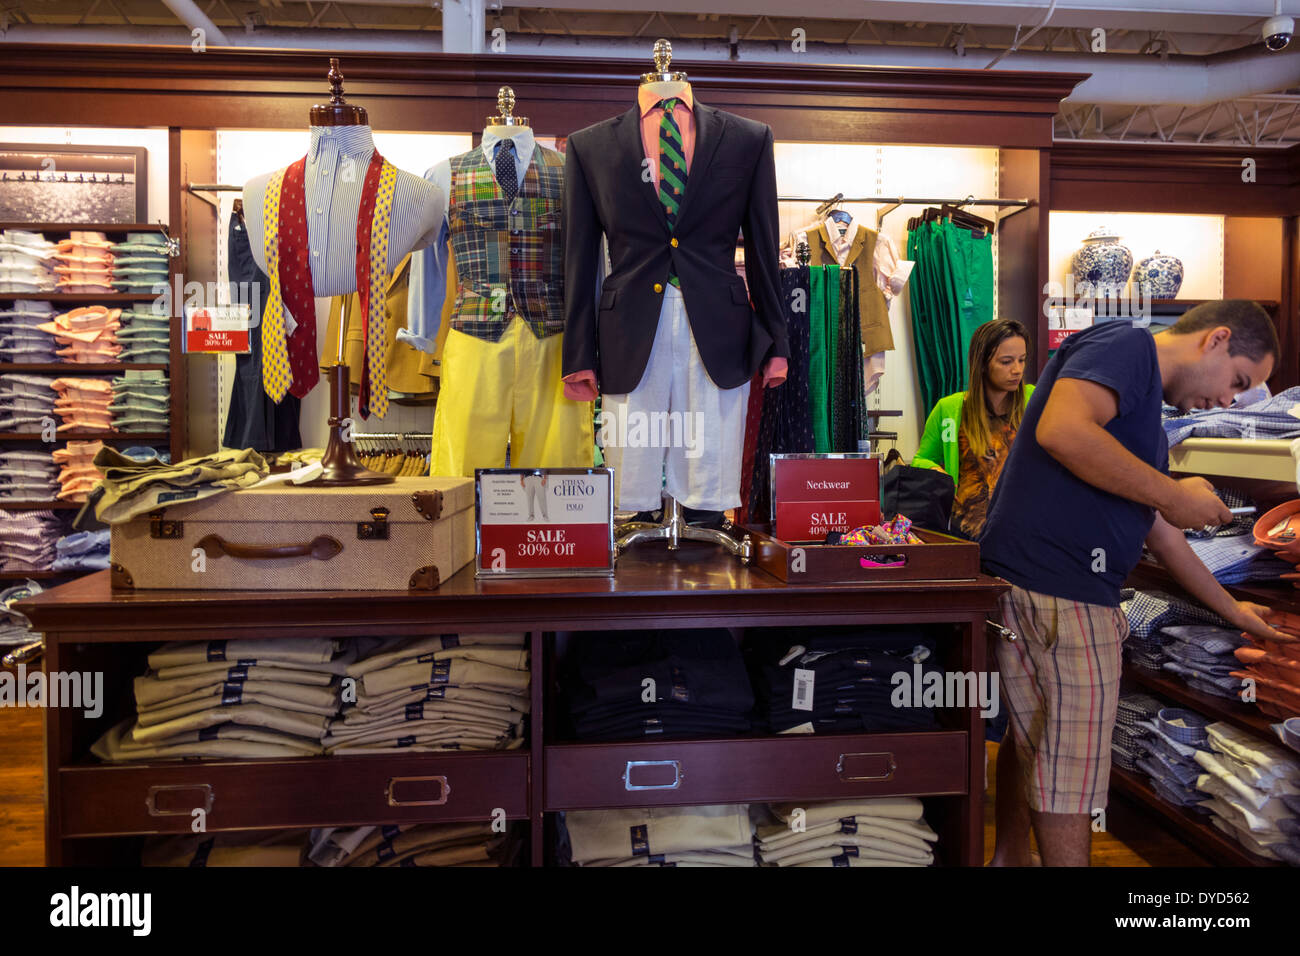 Polo ralph lauren outlet inside interior clothing apparel hi-res stock  photography and images - Alamy